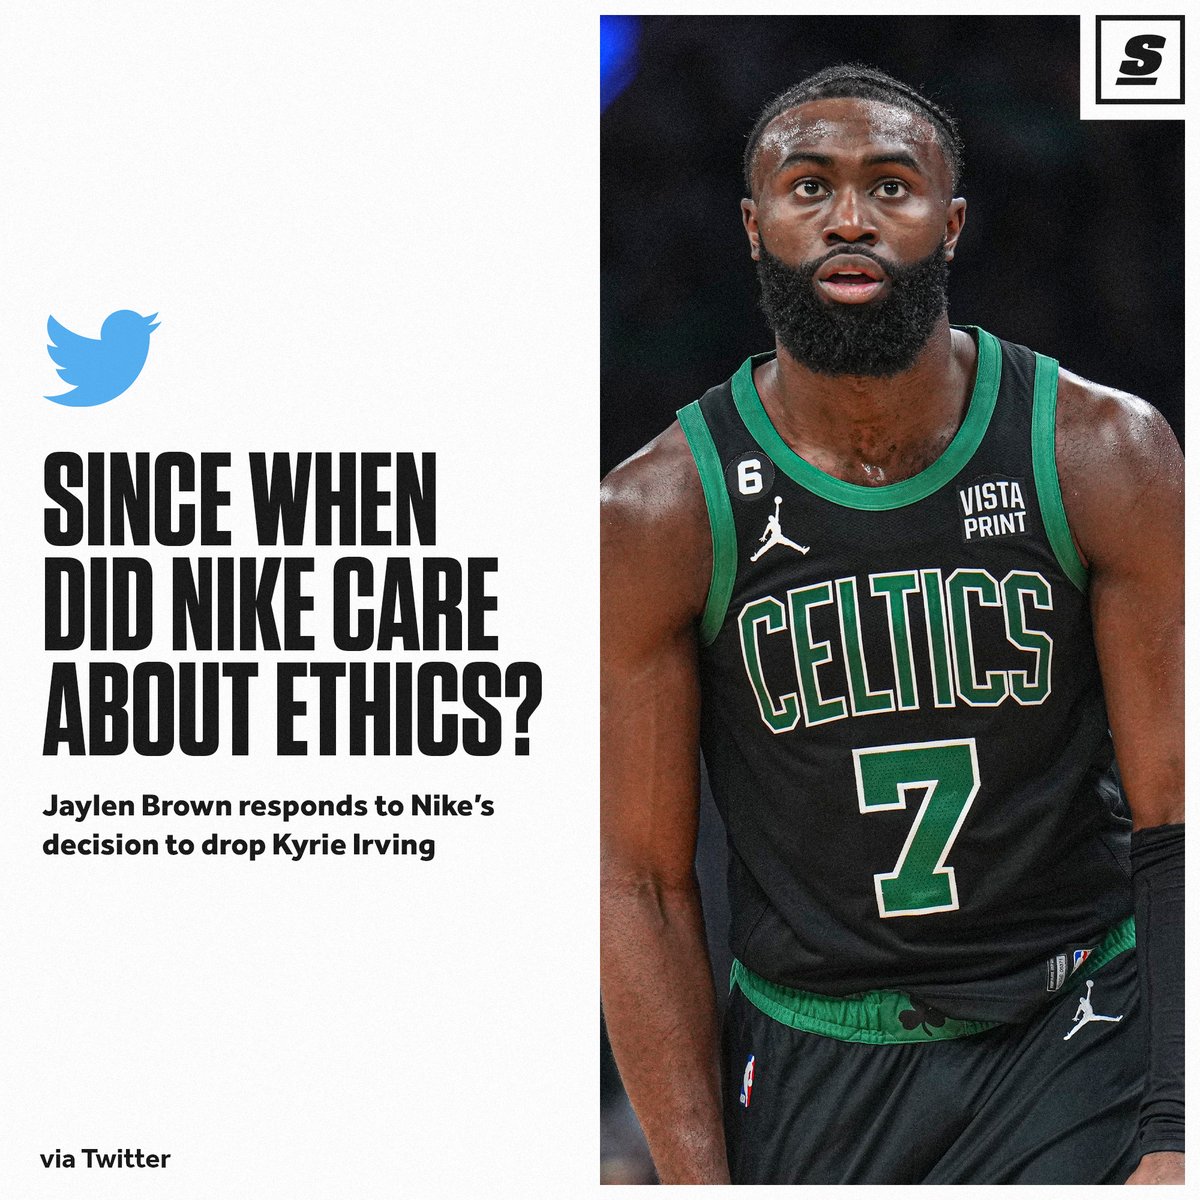 Jaylen Brown takes a shot at Nike for ending contract with Kyrie Irving:  Since when did Nike care about ethics